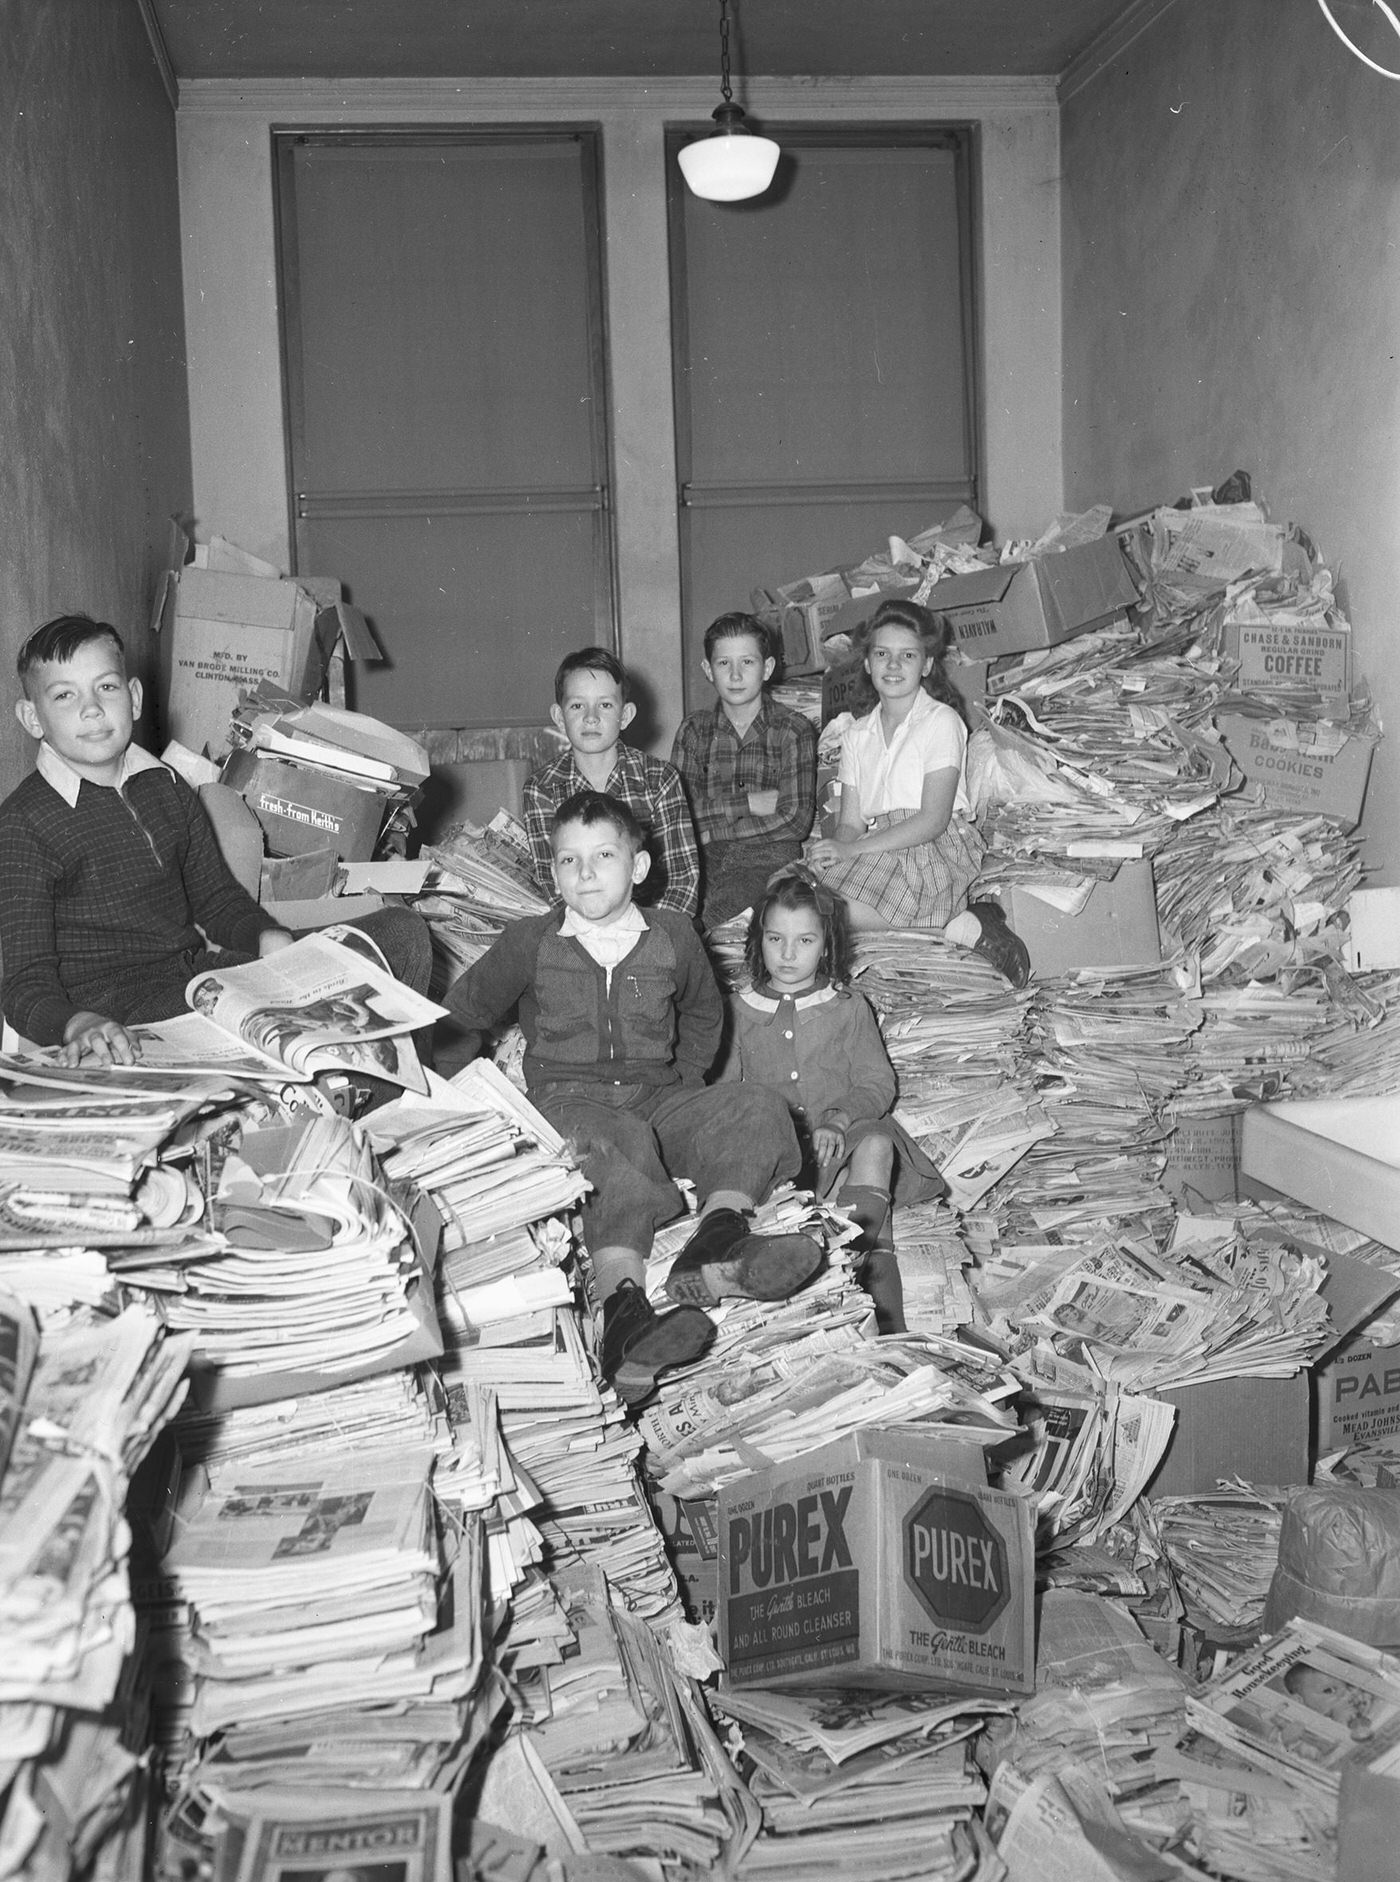 Waste paper collection at Oakhurst Elementary School, 1944